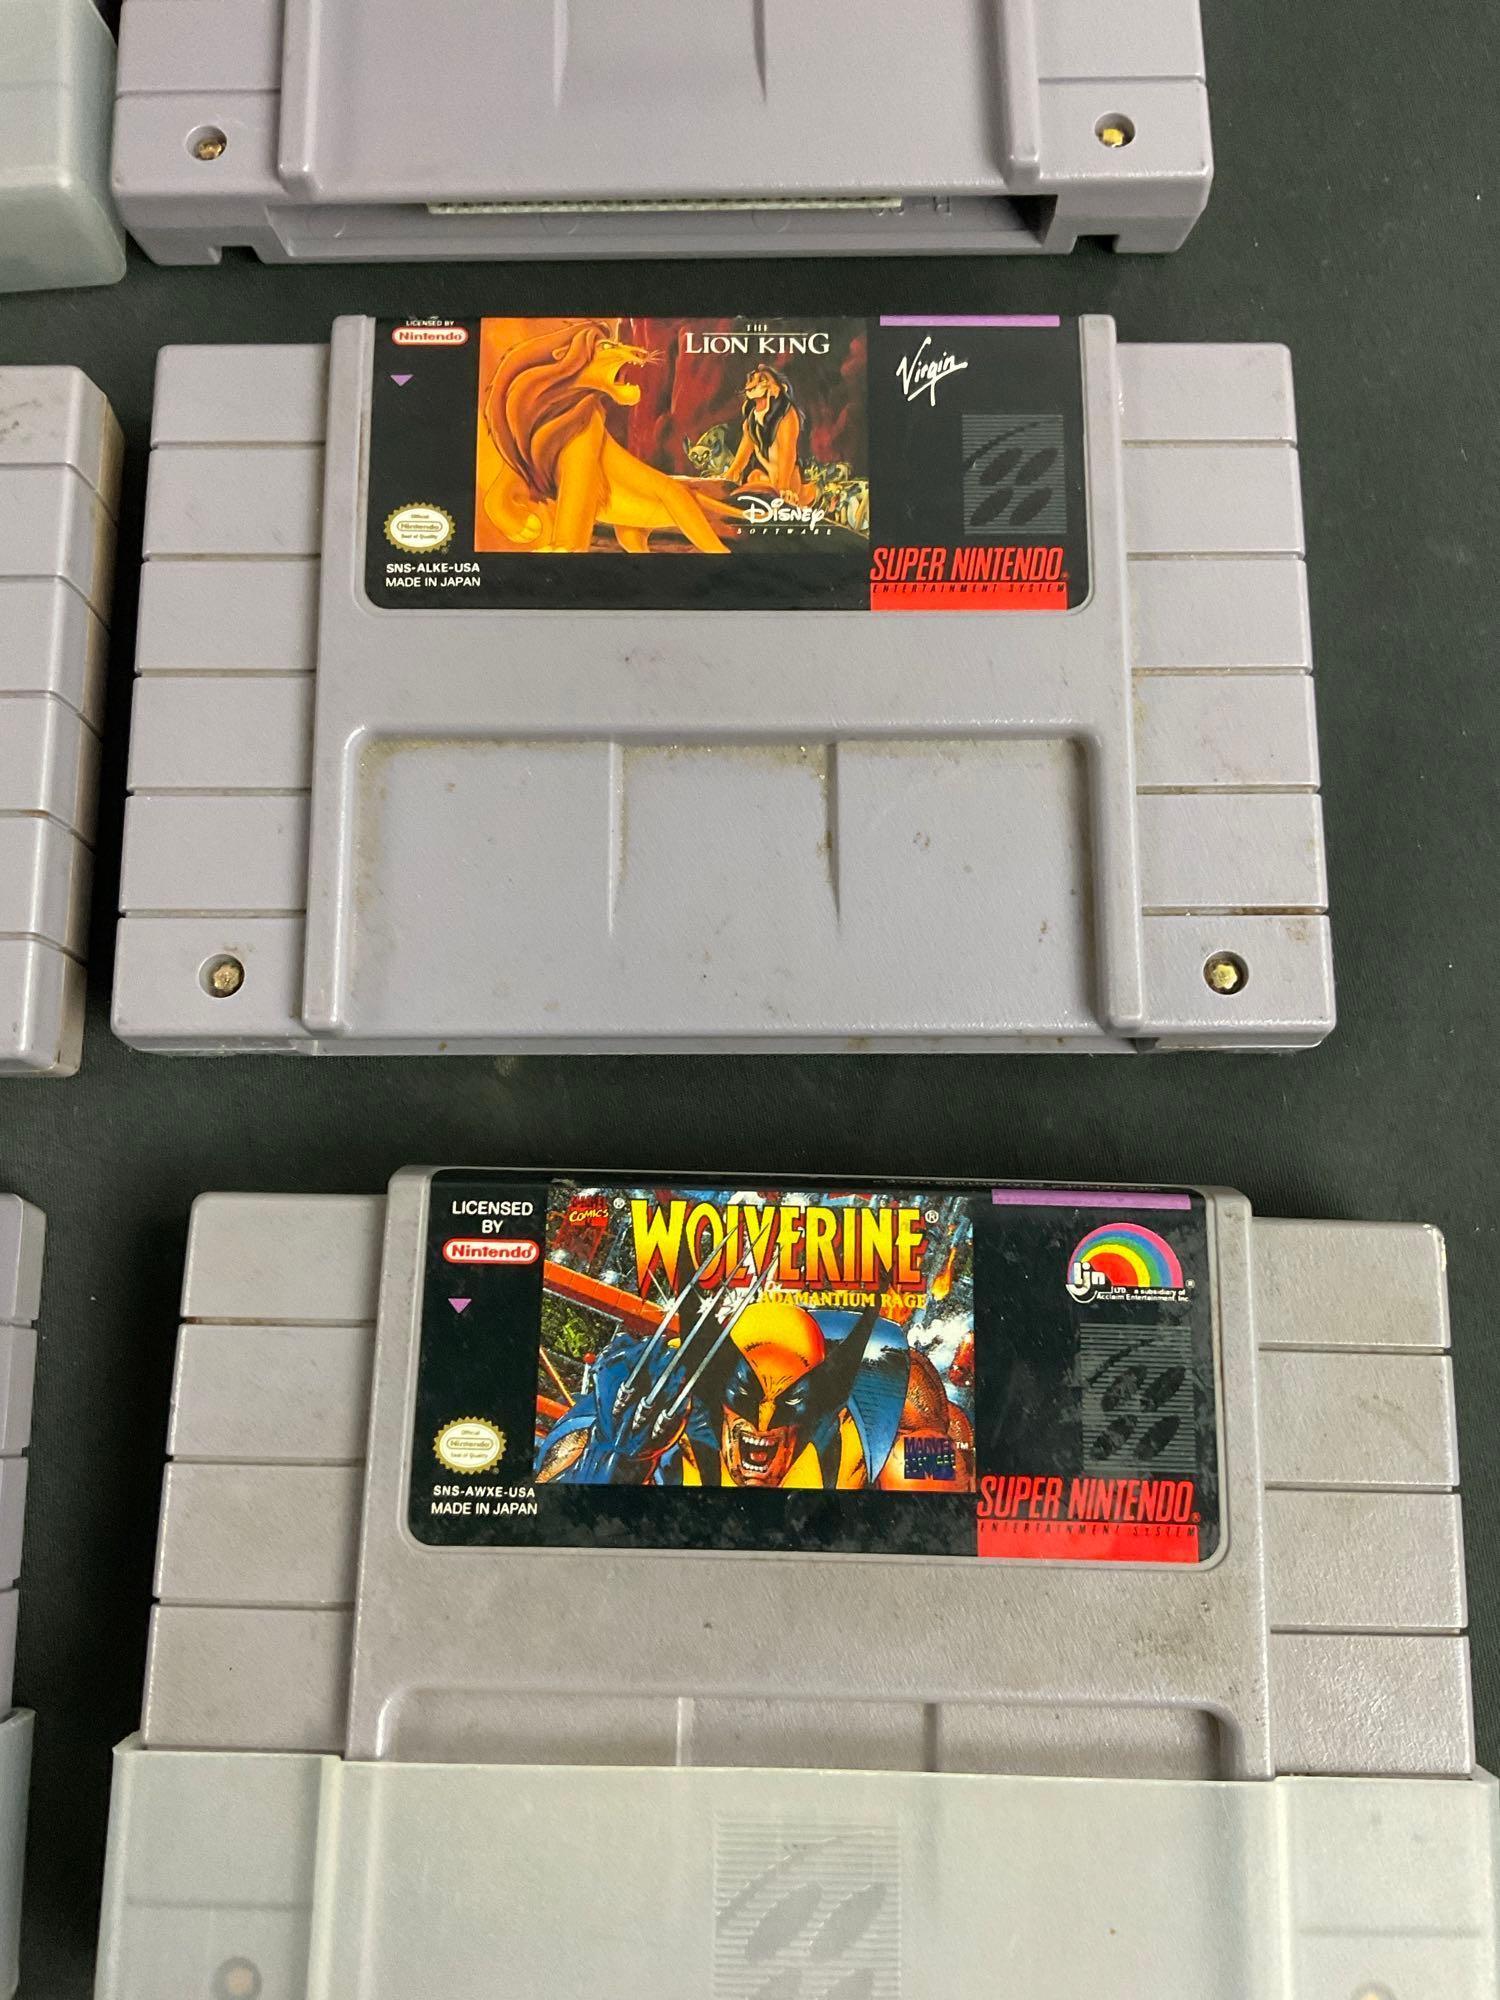 Collection of 16 SNES Game Cartridges incl. Several Star Wars, Starfox, Mario, & Marvel Titles